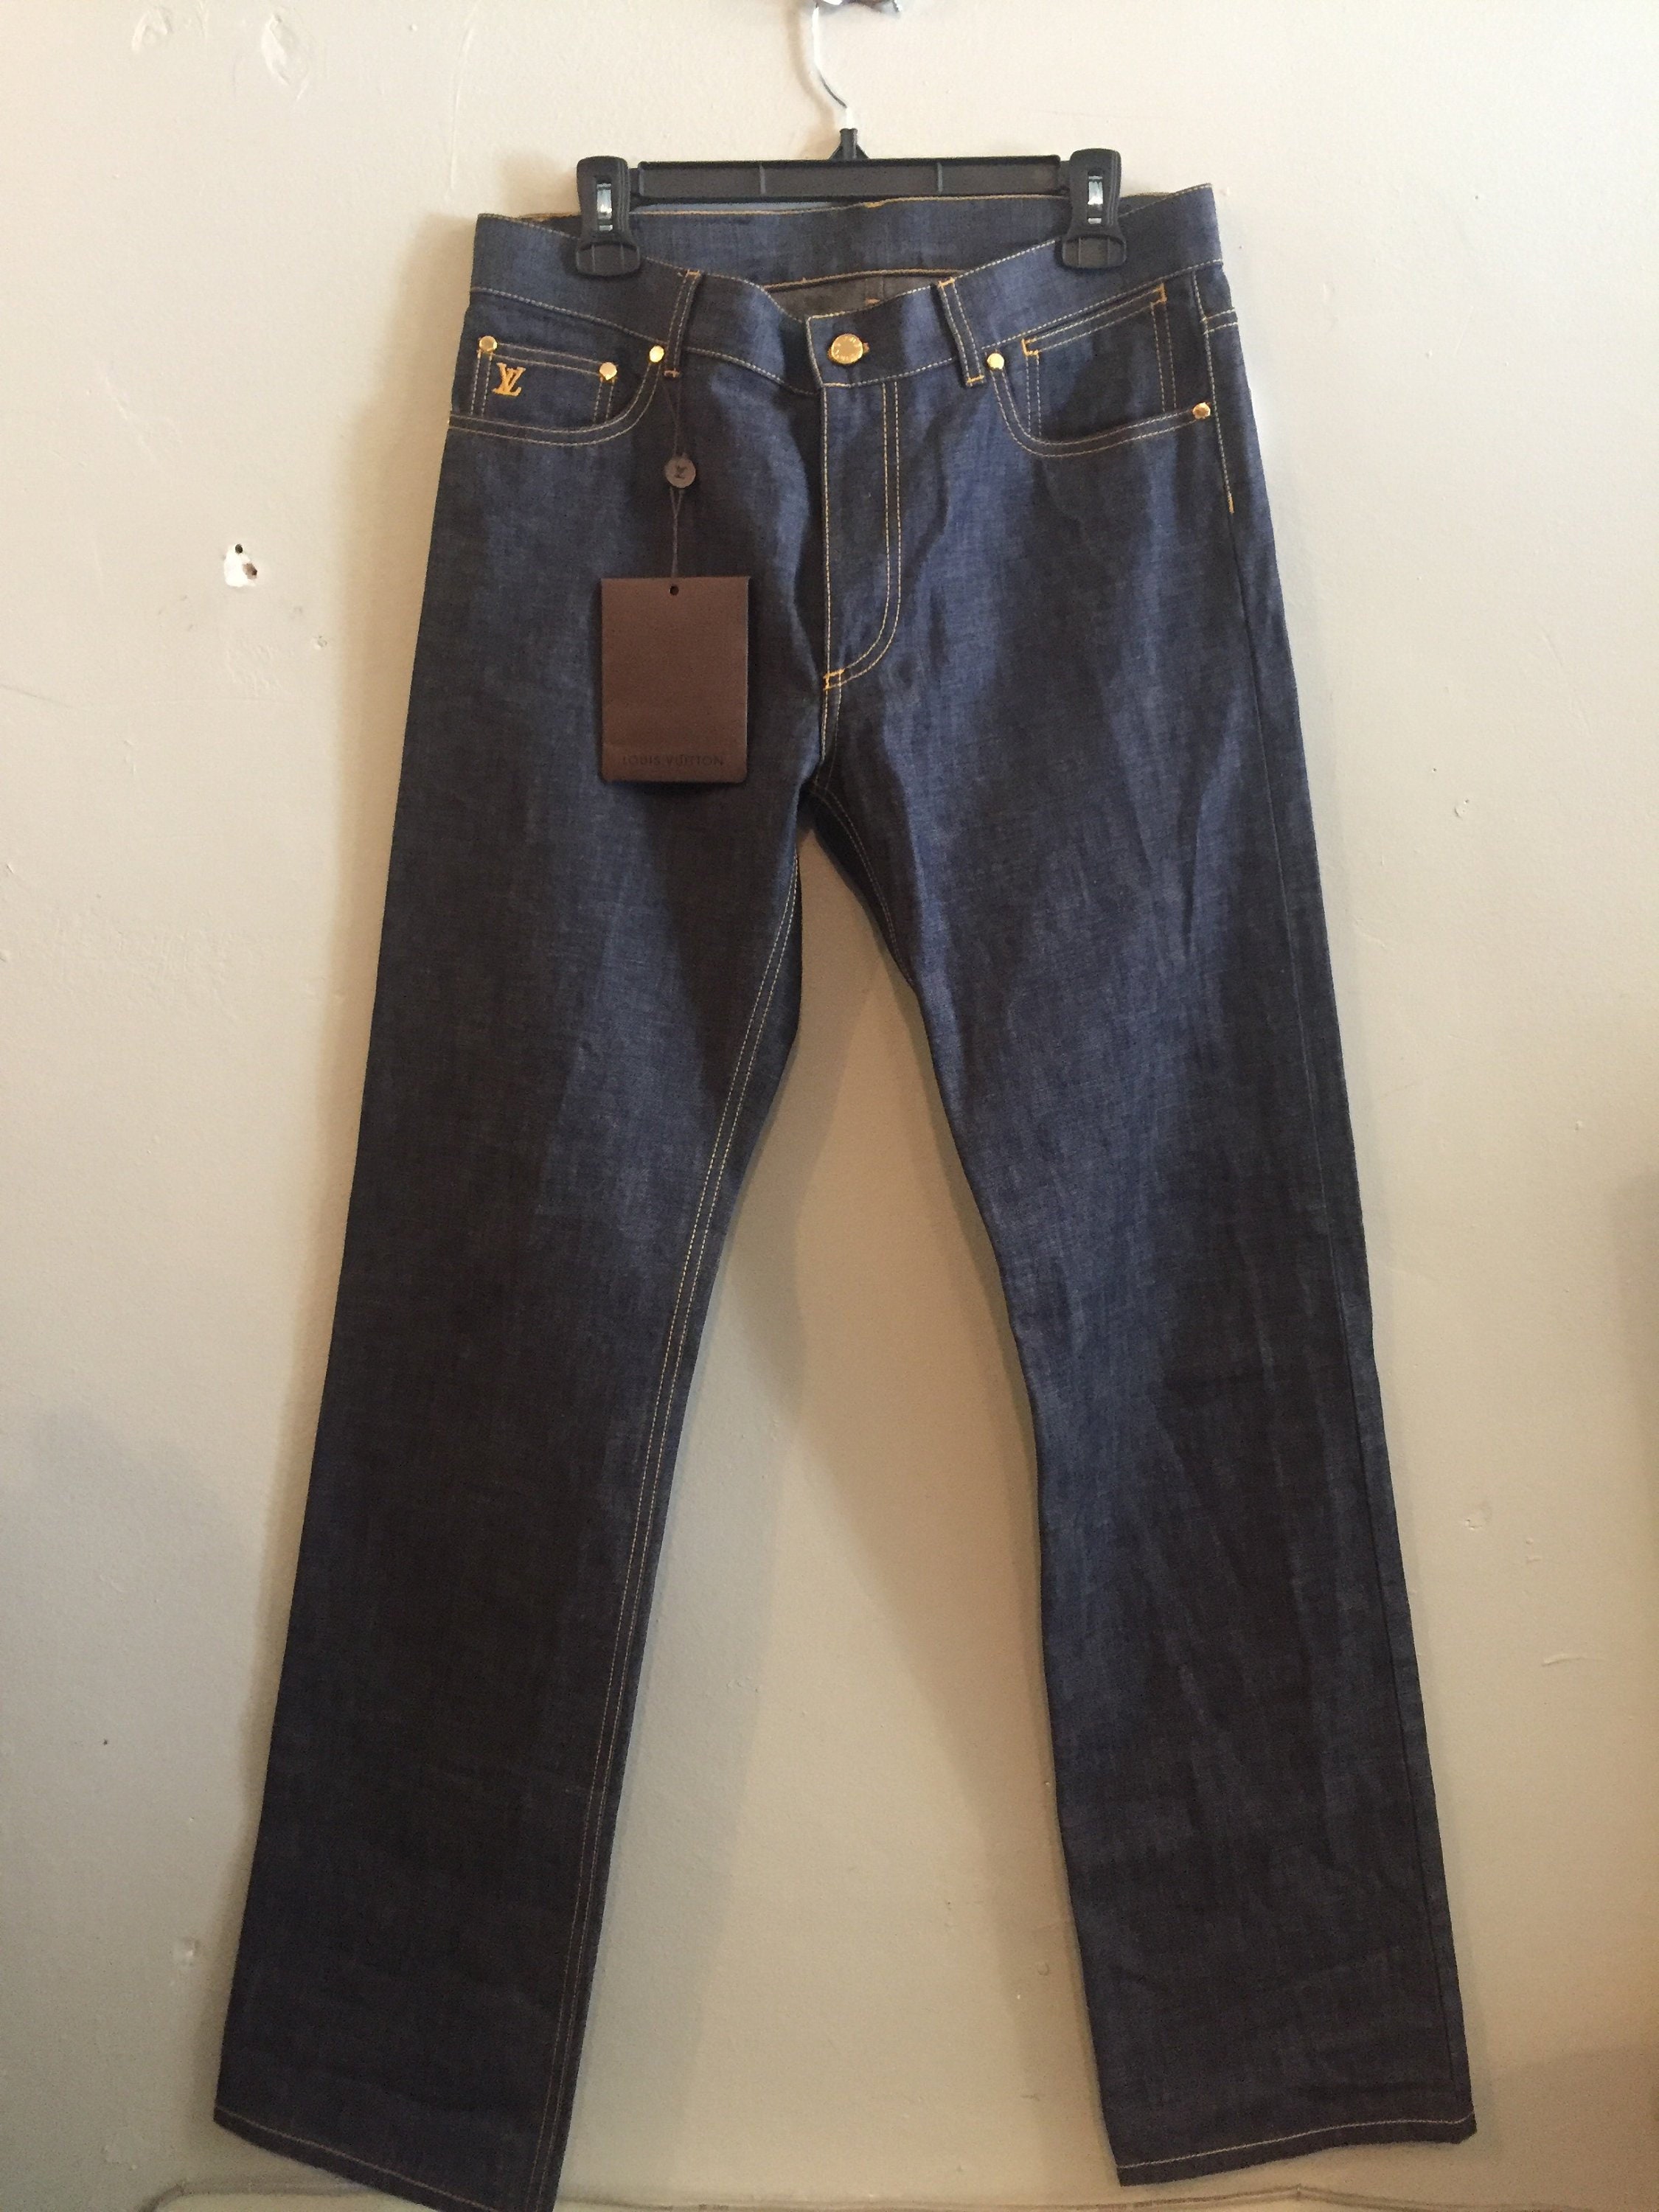 LOUIS VUITTON / Jeans / Authentic Denim / Made in France / -  India